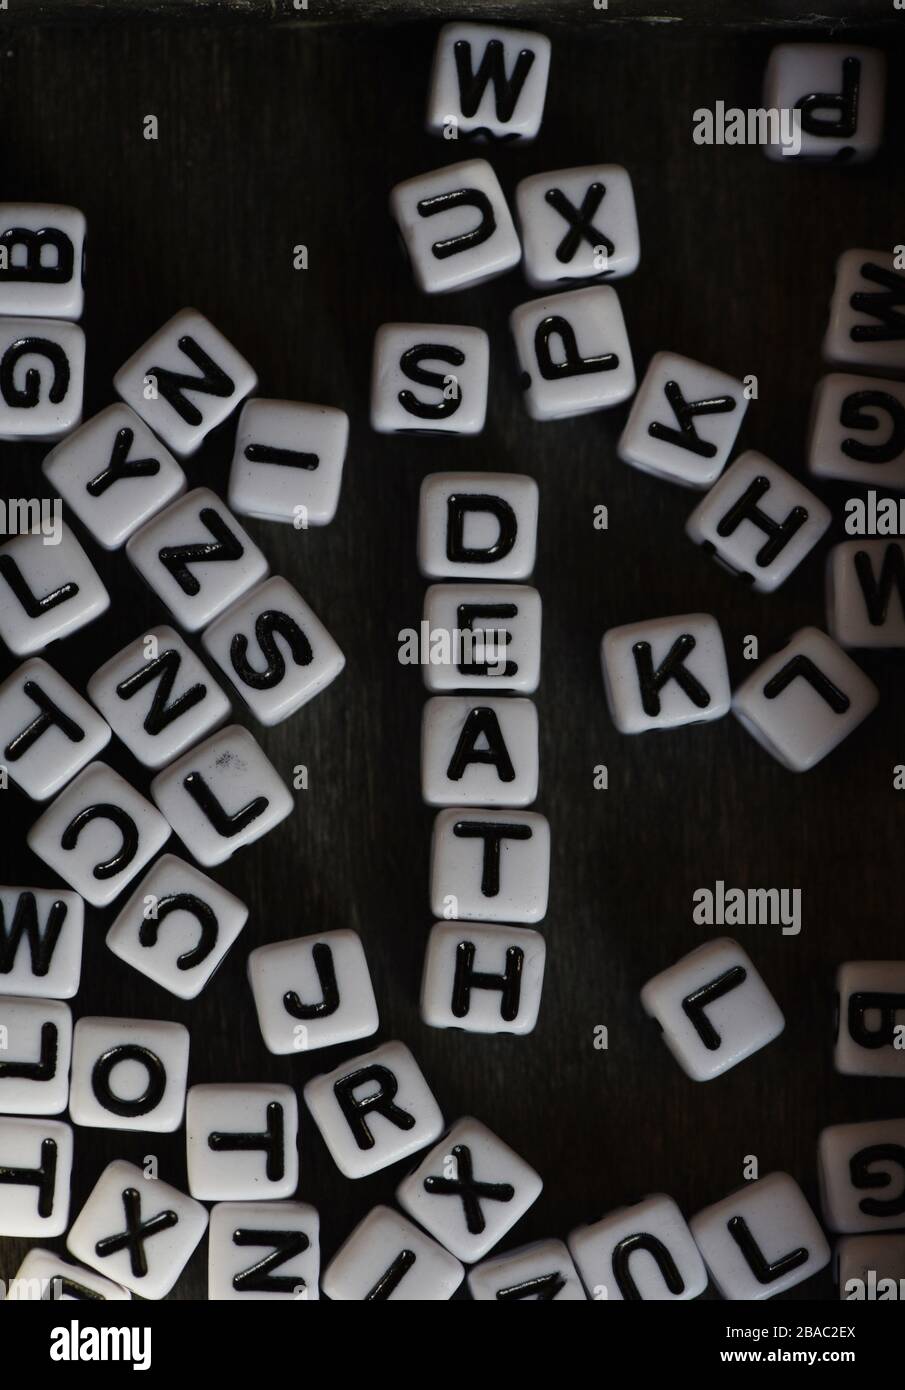 Still life showing black and white letter blocks spelling out the word death among other letter blocks against a black background Stock Photo